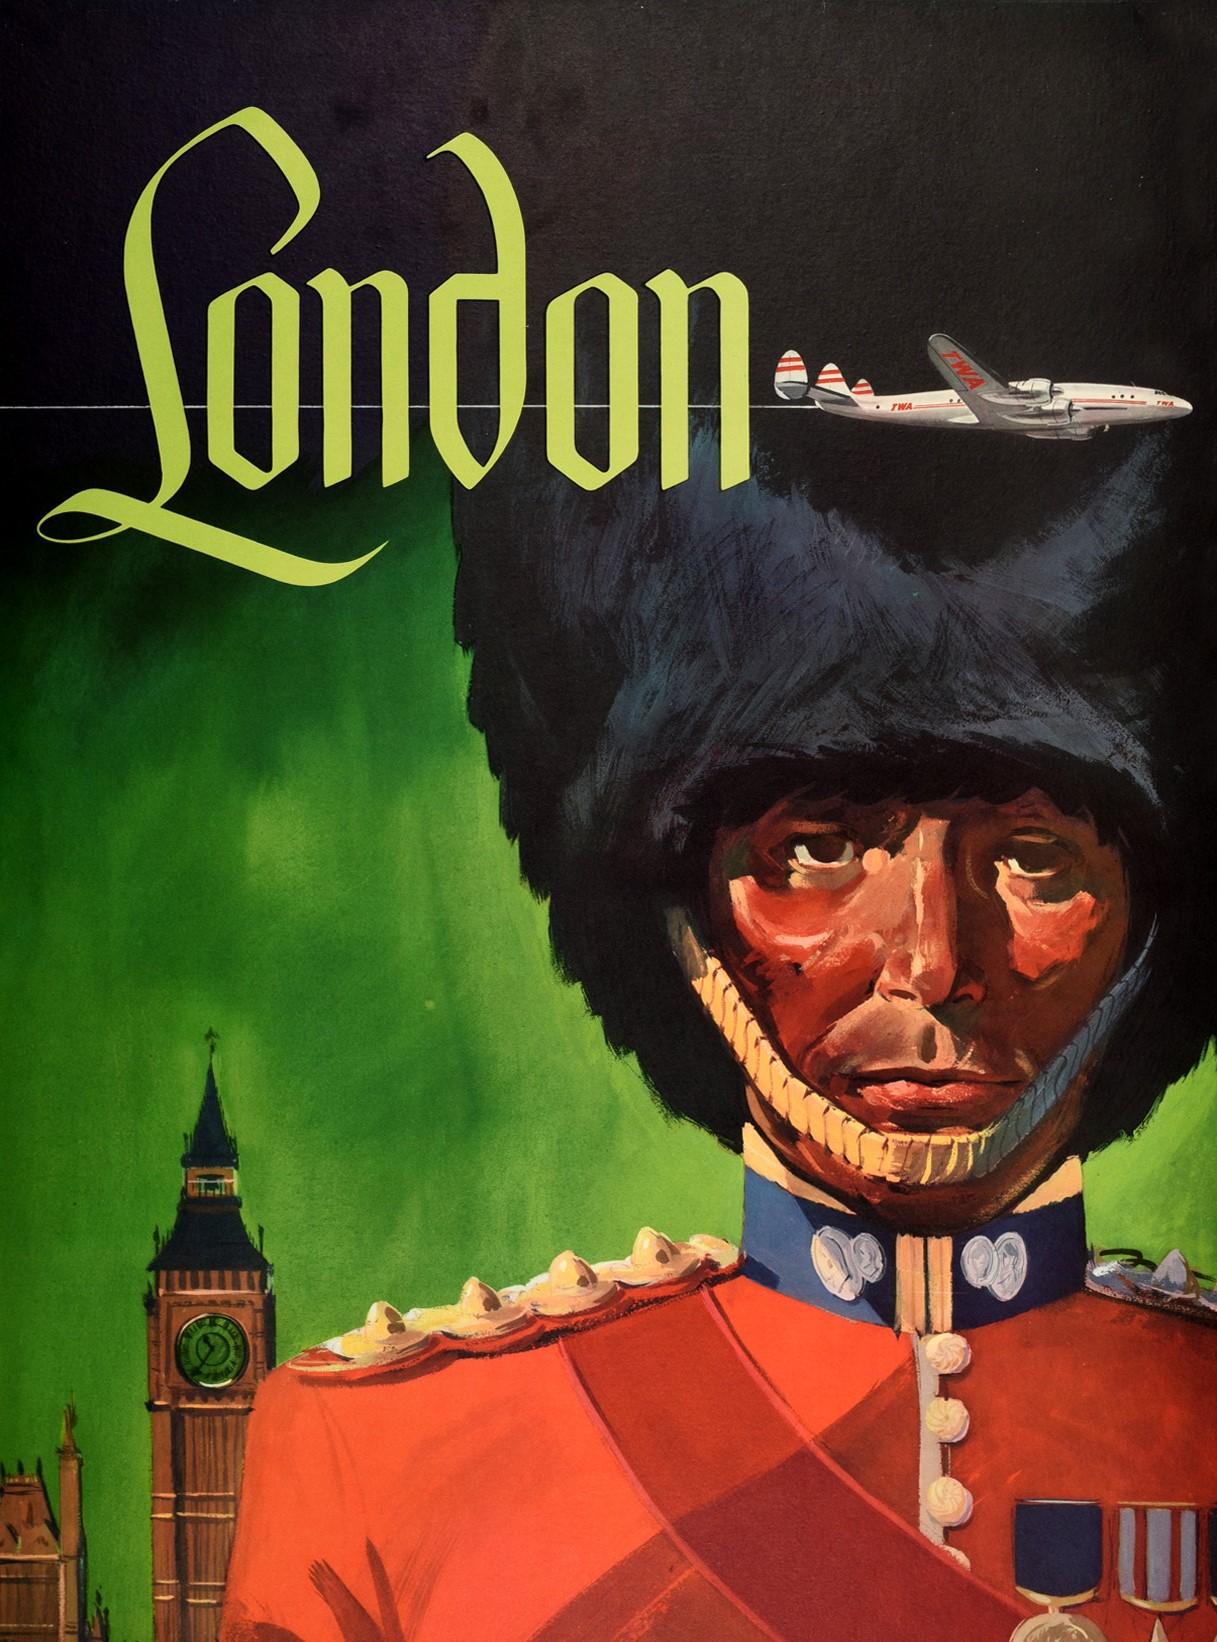 Original vintage travel poster for London issued by Trans World Airlines / TWA featuring a great design by the notable American artist David Klein (1918-2005) depicting a Royal Guard / Queen's Guard in red military uniform and bearskin hat standing